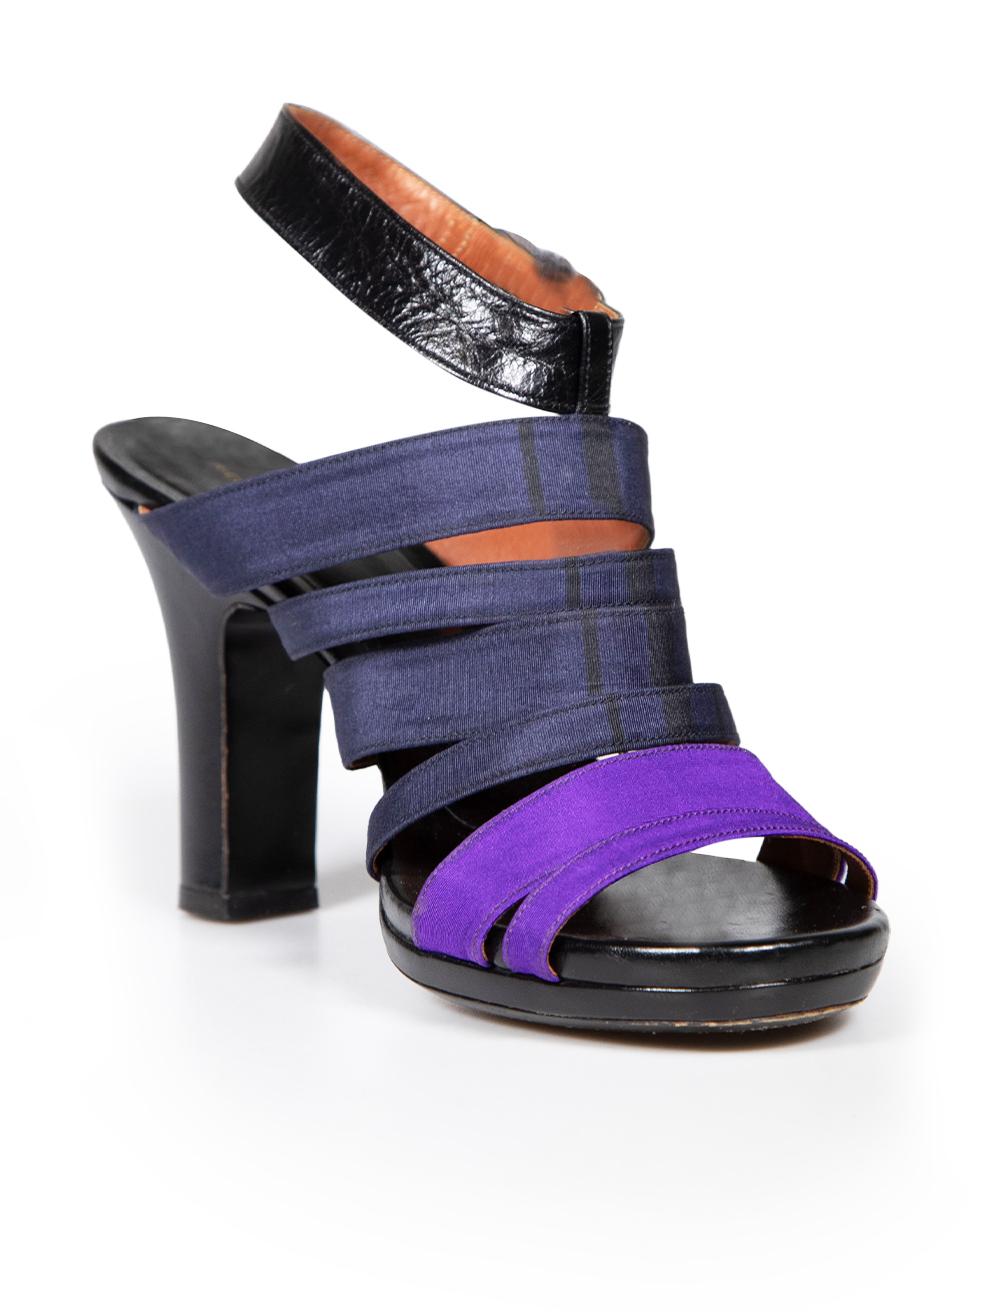 CONDITION is Very good. Minimal wear to sandals is evident. Minimal wear to rear heel where indents and scratch marks is seen on this used Dries Van Noten designer resale item.
 
 
 
 Details
 
 
 Multicolour- purple, navy, black
 
 Cloth
 
